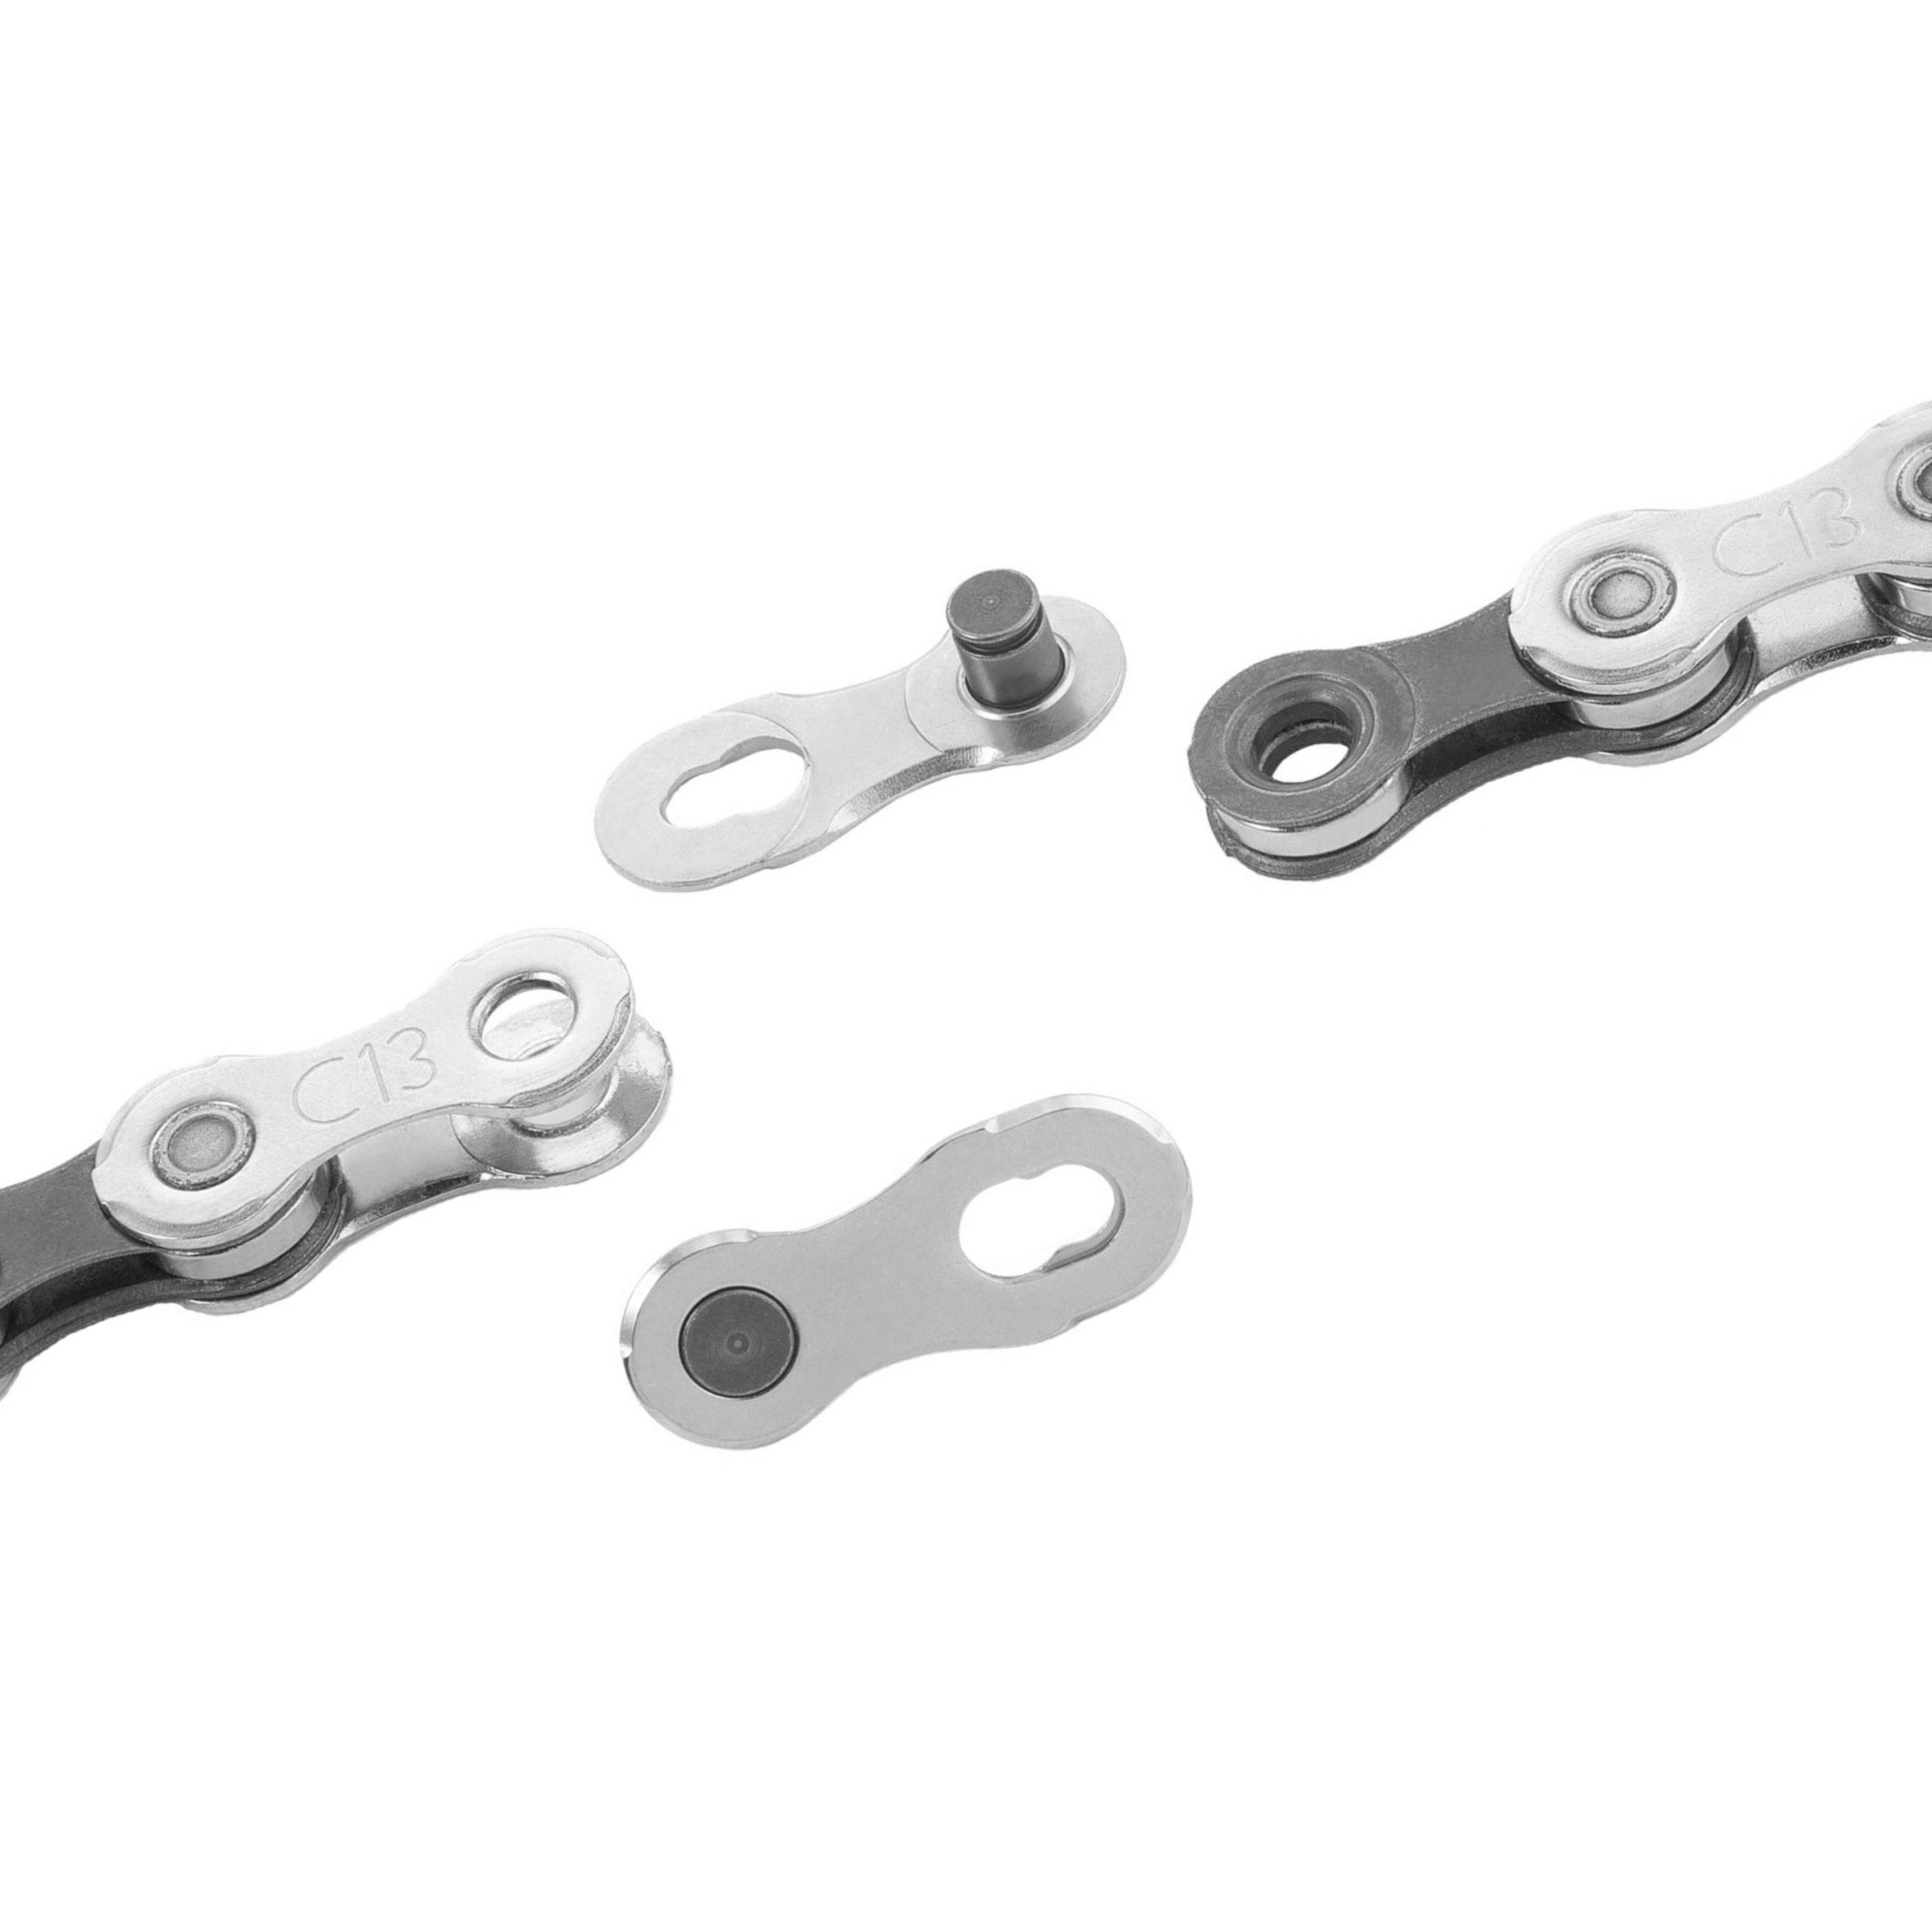 13-Speed Silver Campagnolo EKAR Chain With C-Link 117 Links 